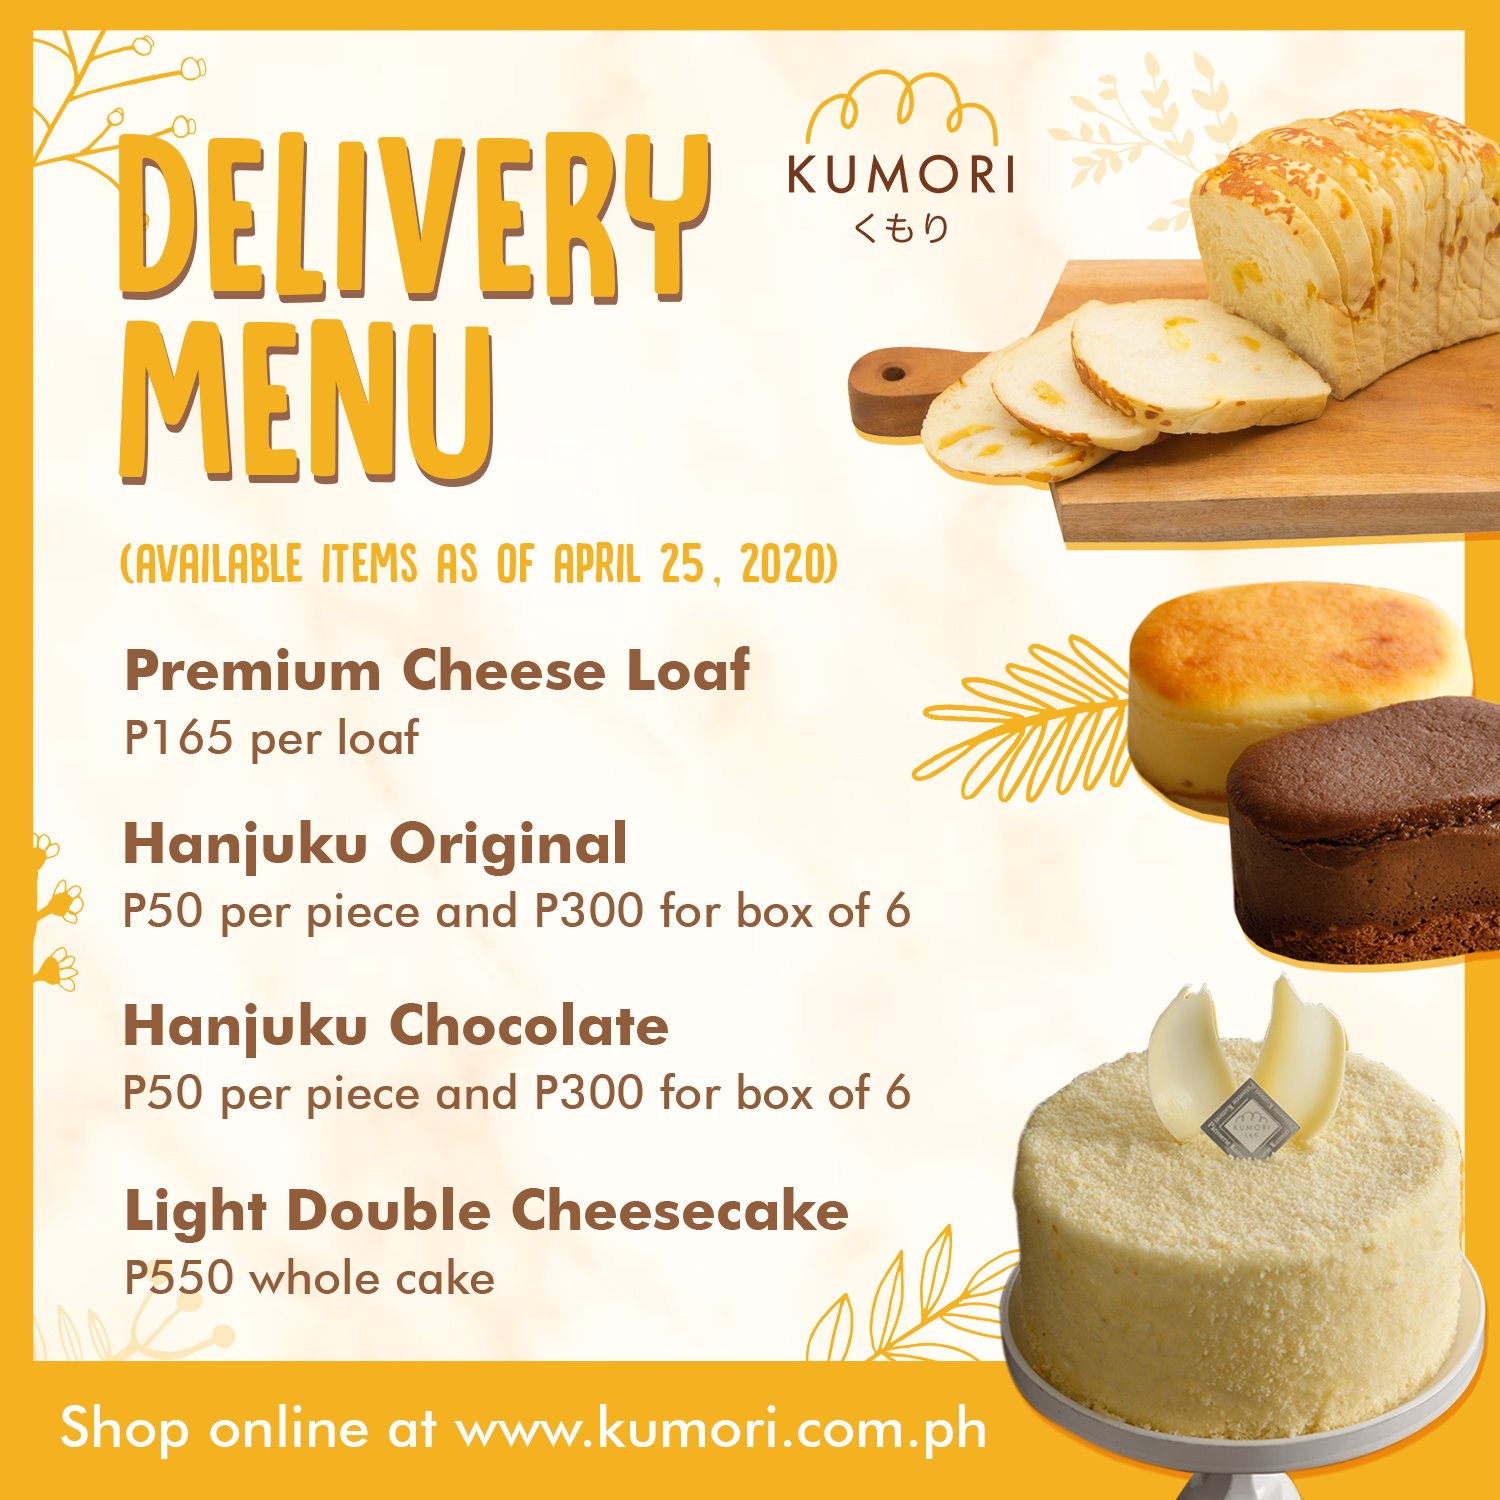 Kumori's Cheesy Desserts Are Now Available For Delivery